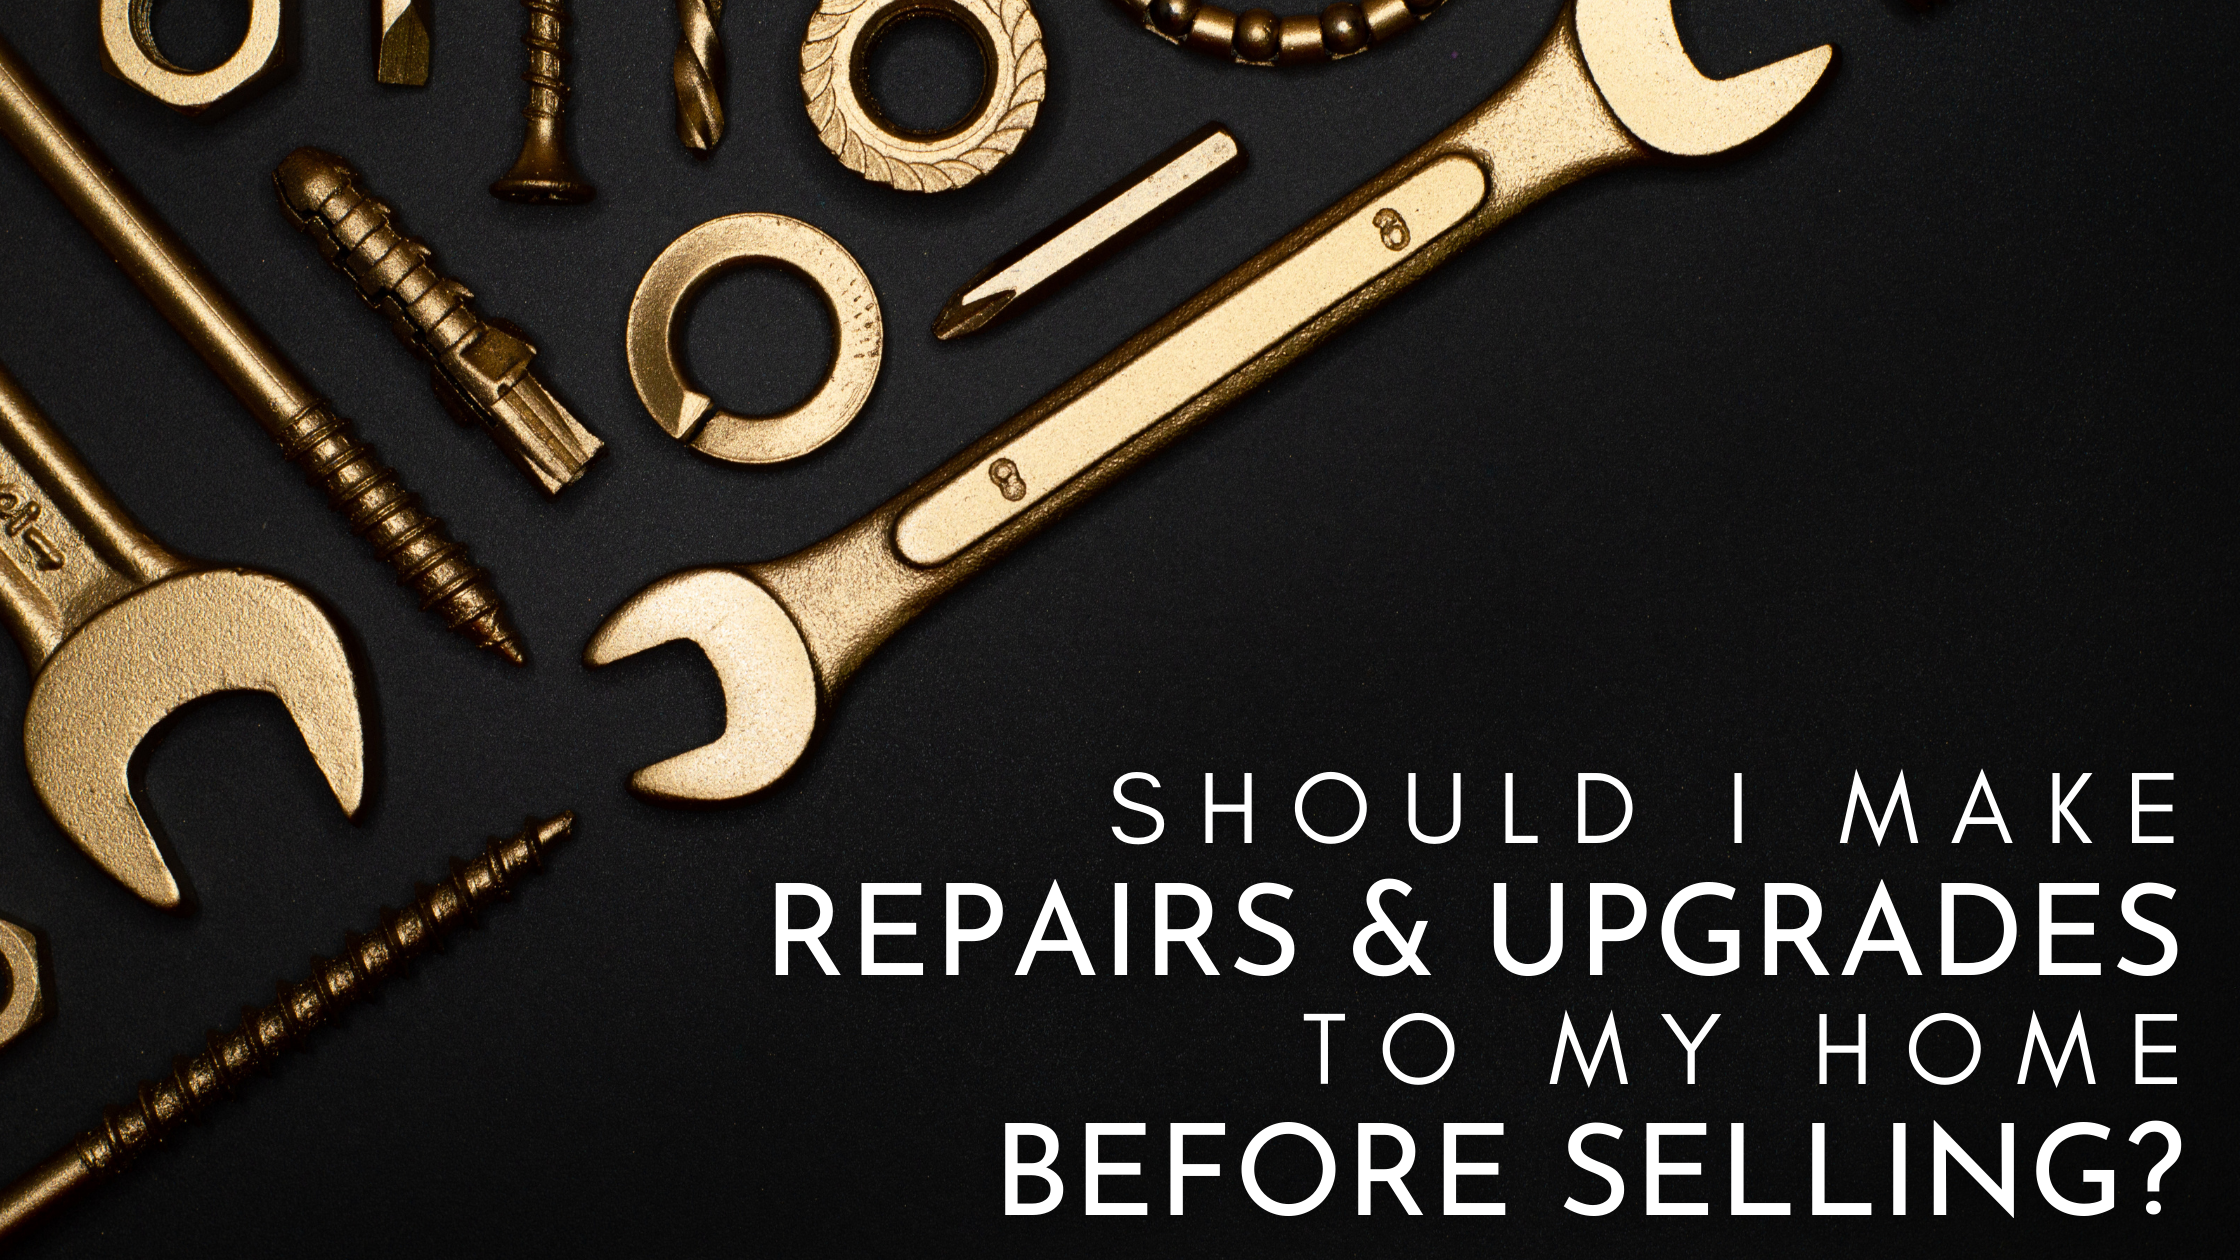 Should I Make Repairs & Upgrades to my Home Before Selling?